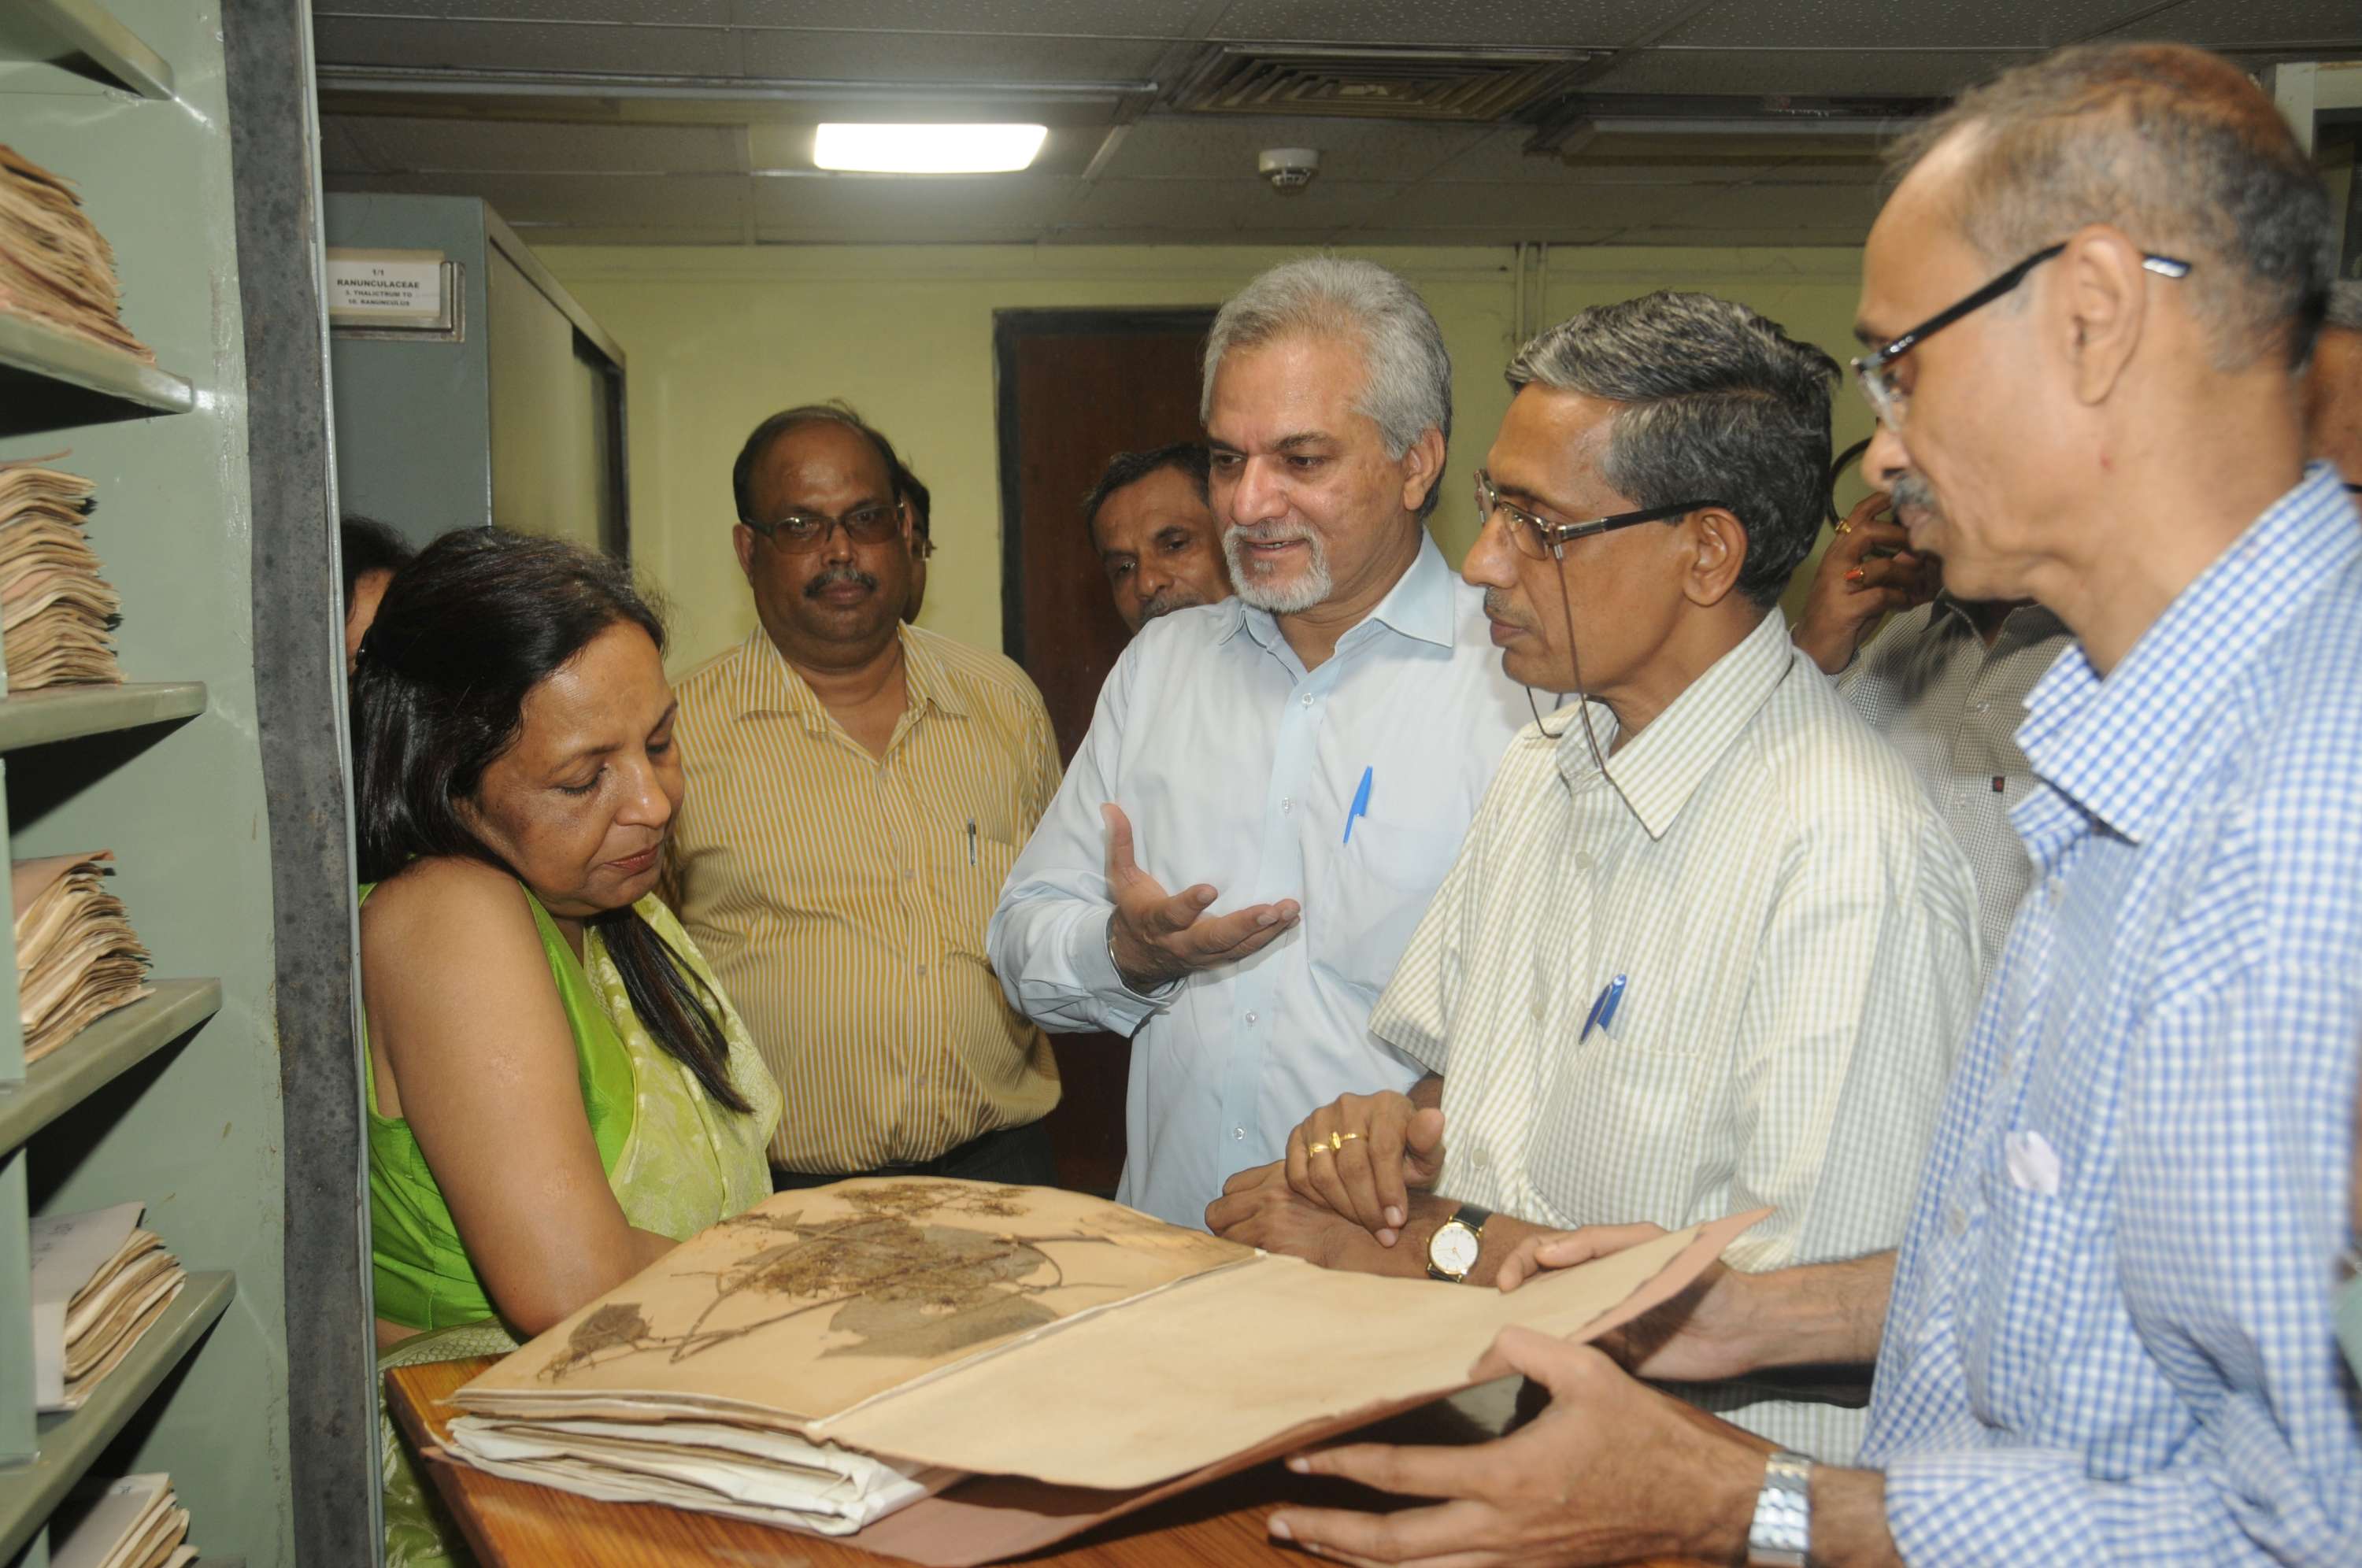 Viewing of Herbarium specimens by Addl. Secretary at CNH Building